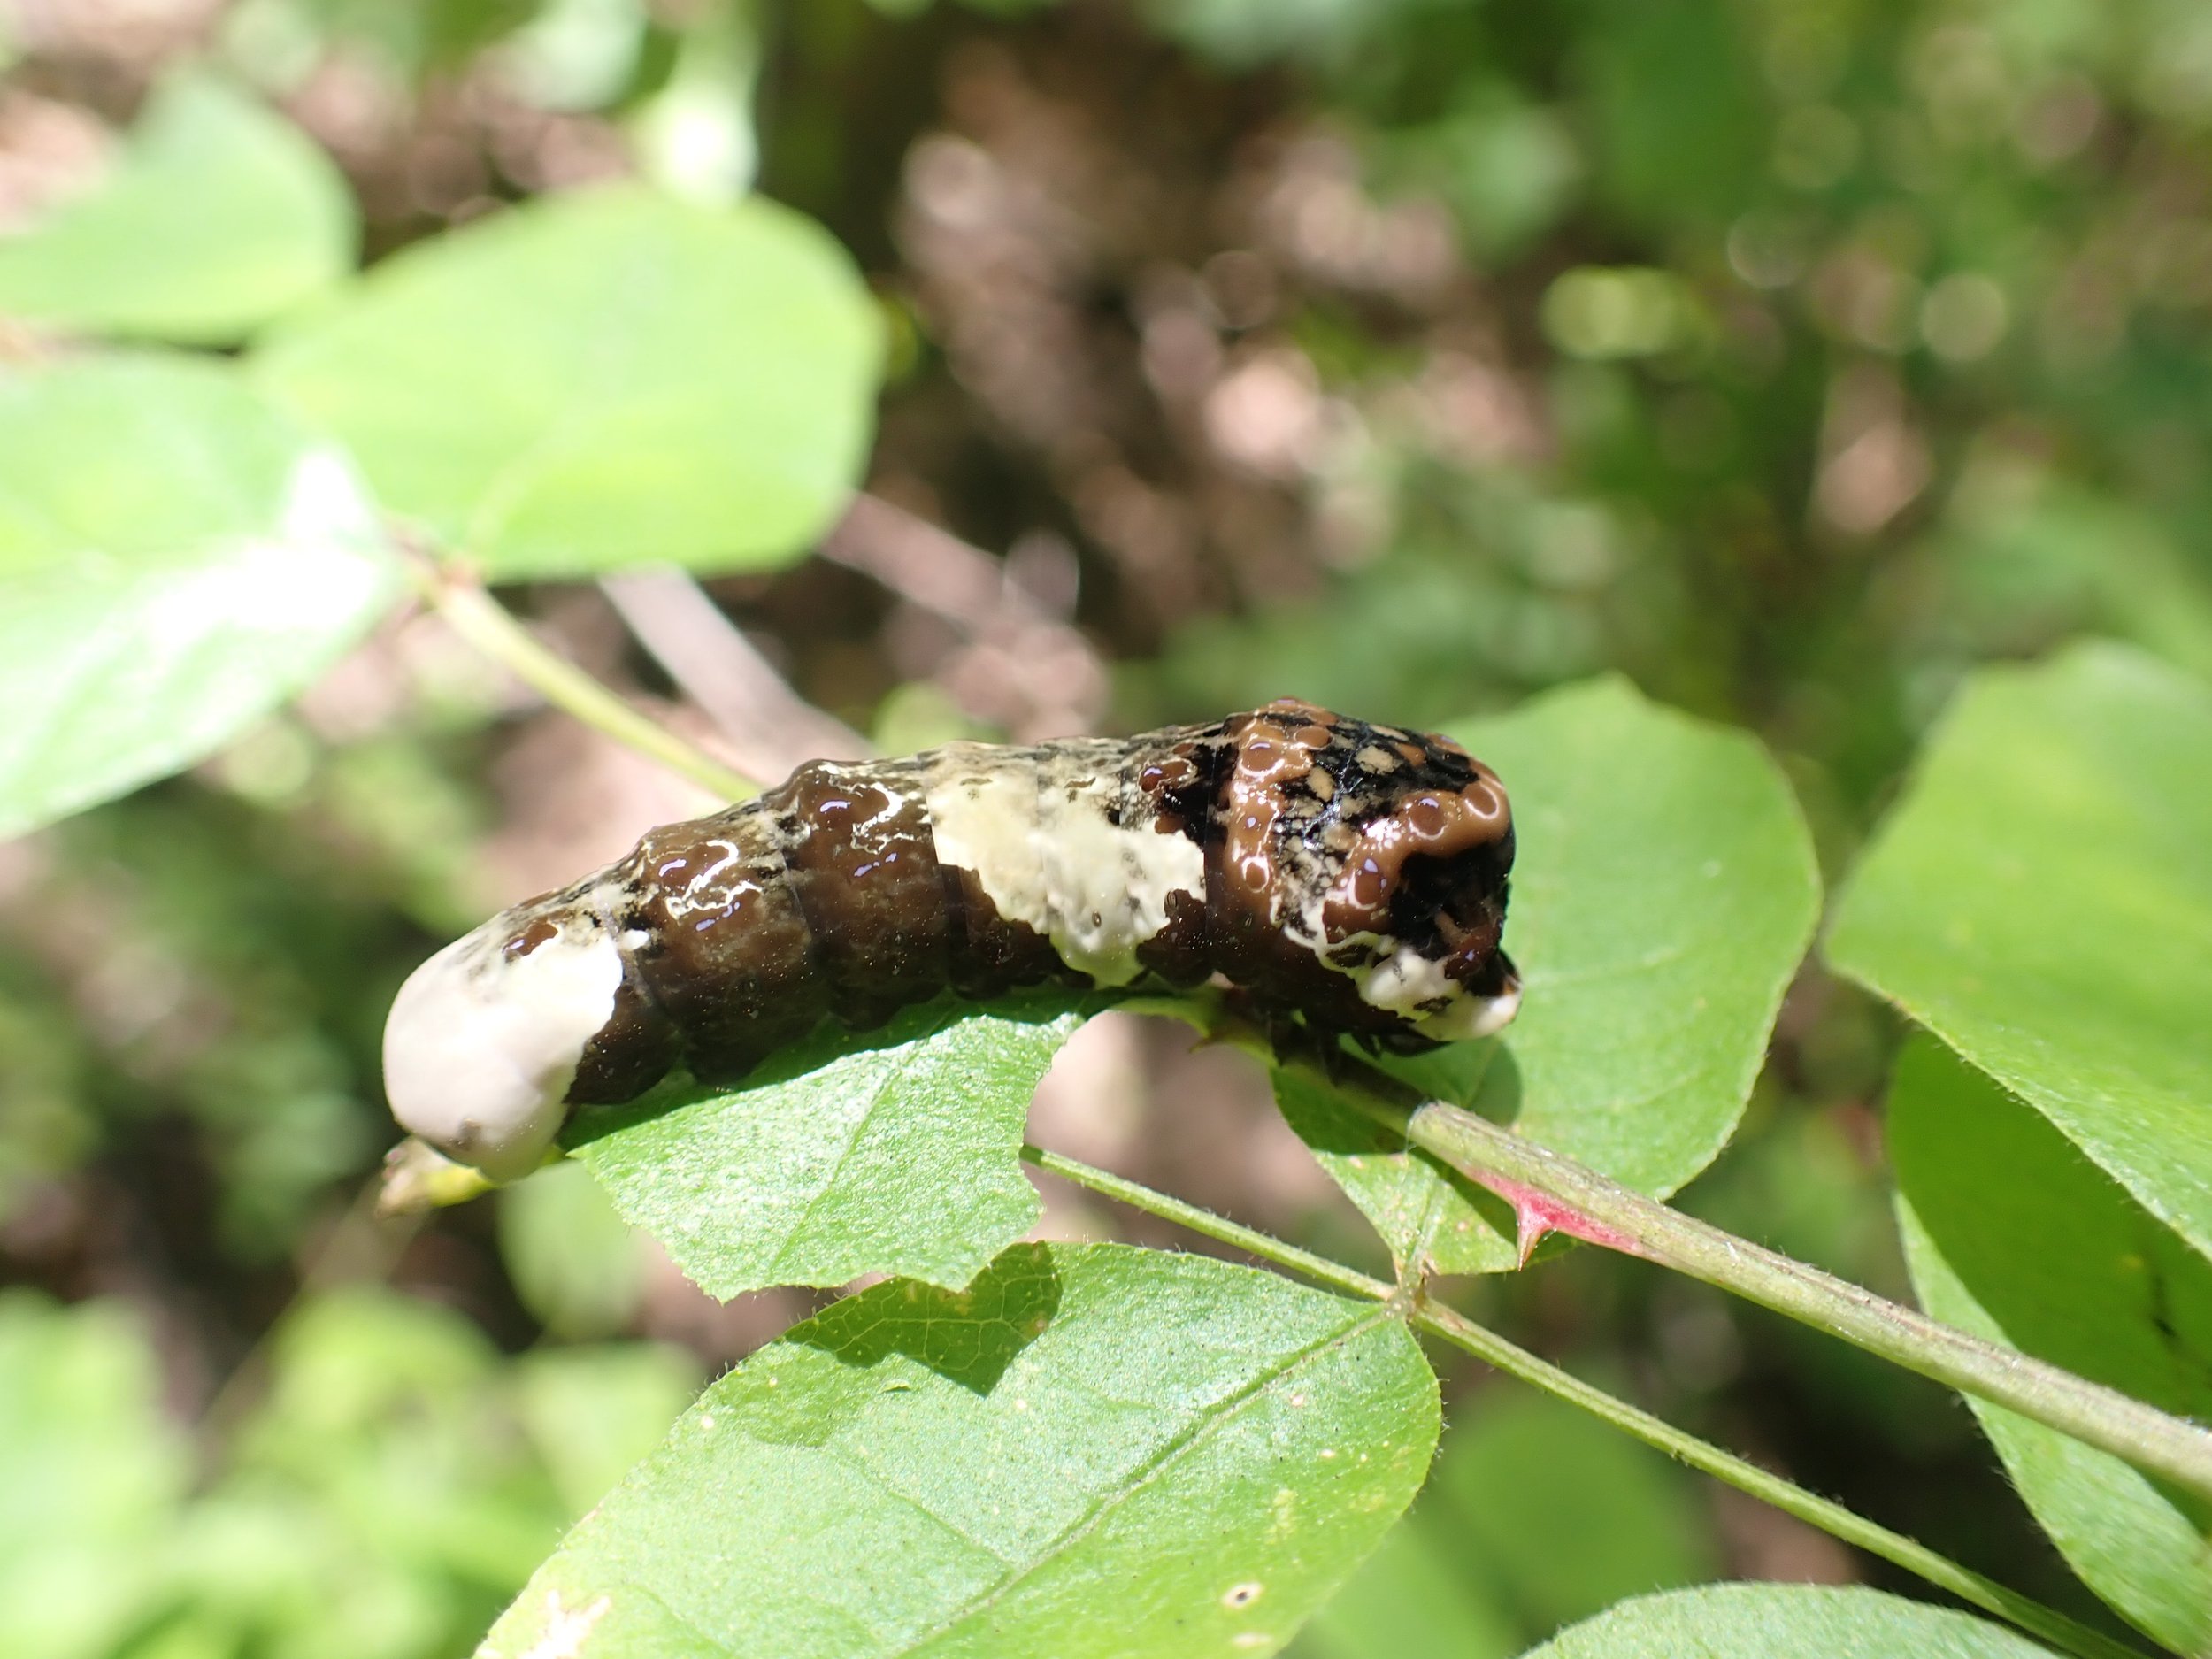  The Prickly Ash is a small native tree that is the host plant for the Giant Swallowtail Butterfly. On one of our site visits, we were delighted to find many of their caterpillars in a small grove of Prickly Ash (Photo by Kasia Zgurzynski). 